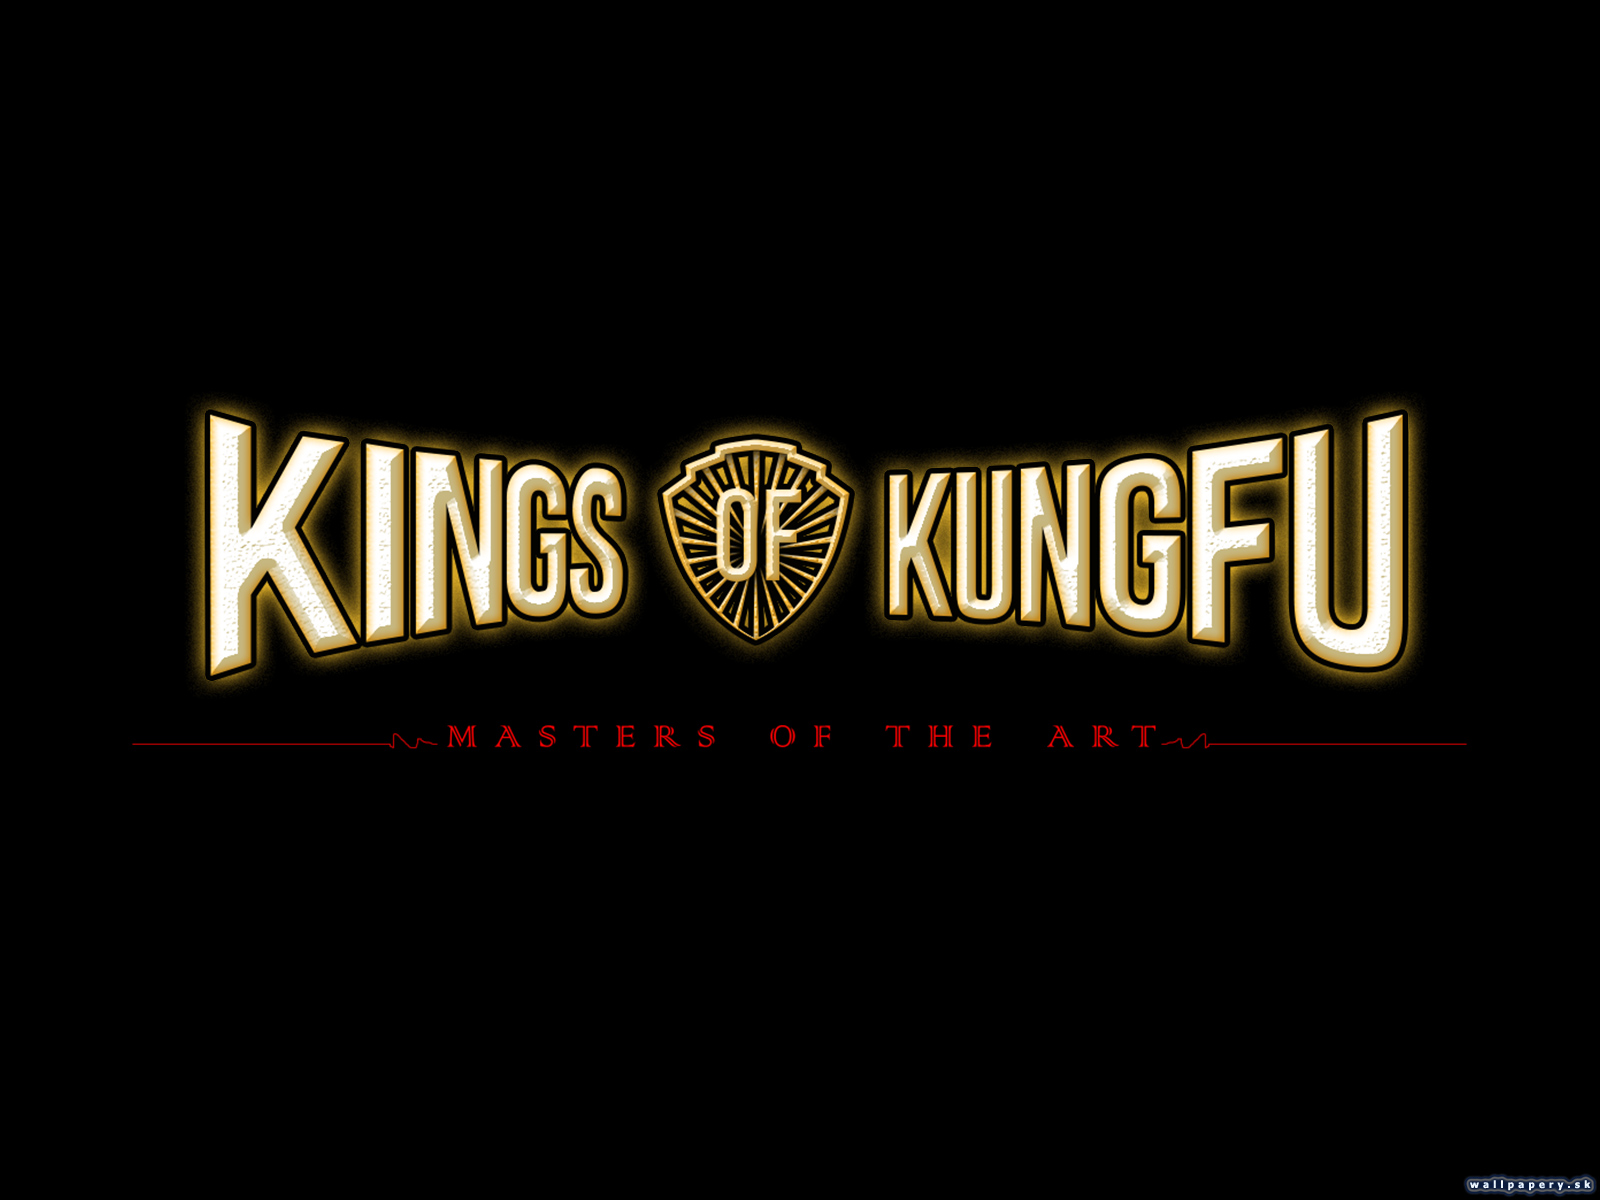 Kings of Kung Fu: Masters of the Art - wallpaper 2